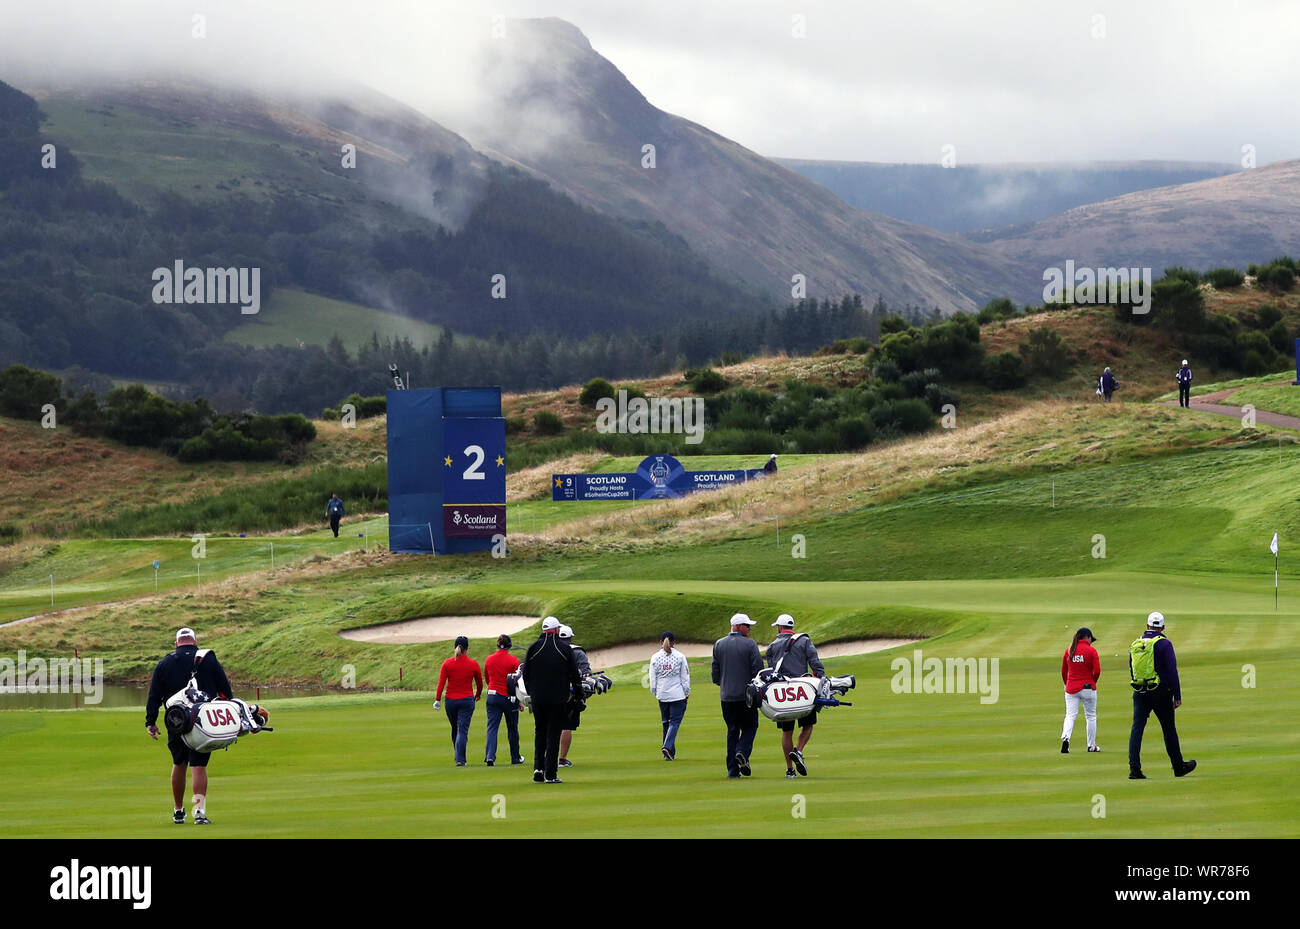 Team USA players including Ally McDonald, Marina Alex, Angel Yin and Morgan Pressel on the 2nd during preview day two of the 2019 Solheim Cup at Gleneagles Golf Club, Auchterarder. Stock Photo